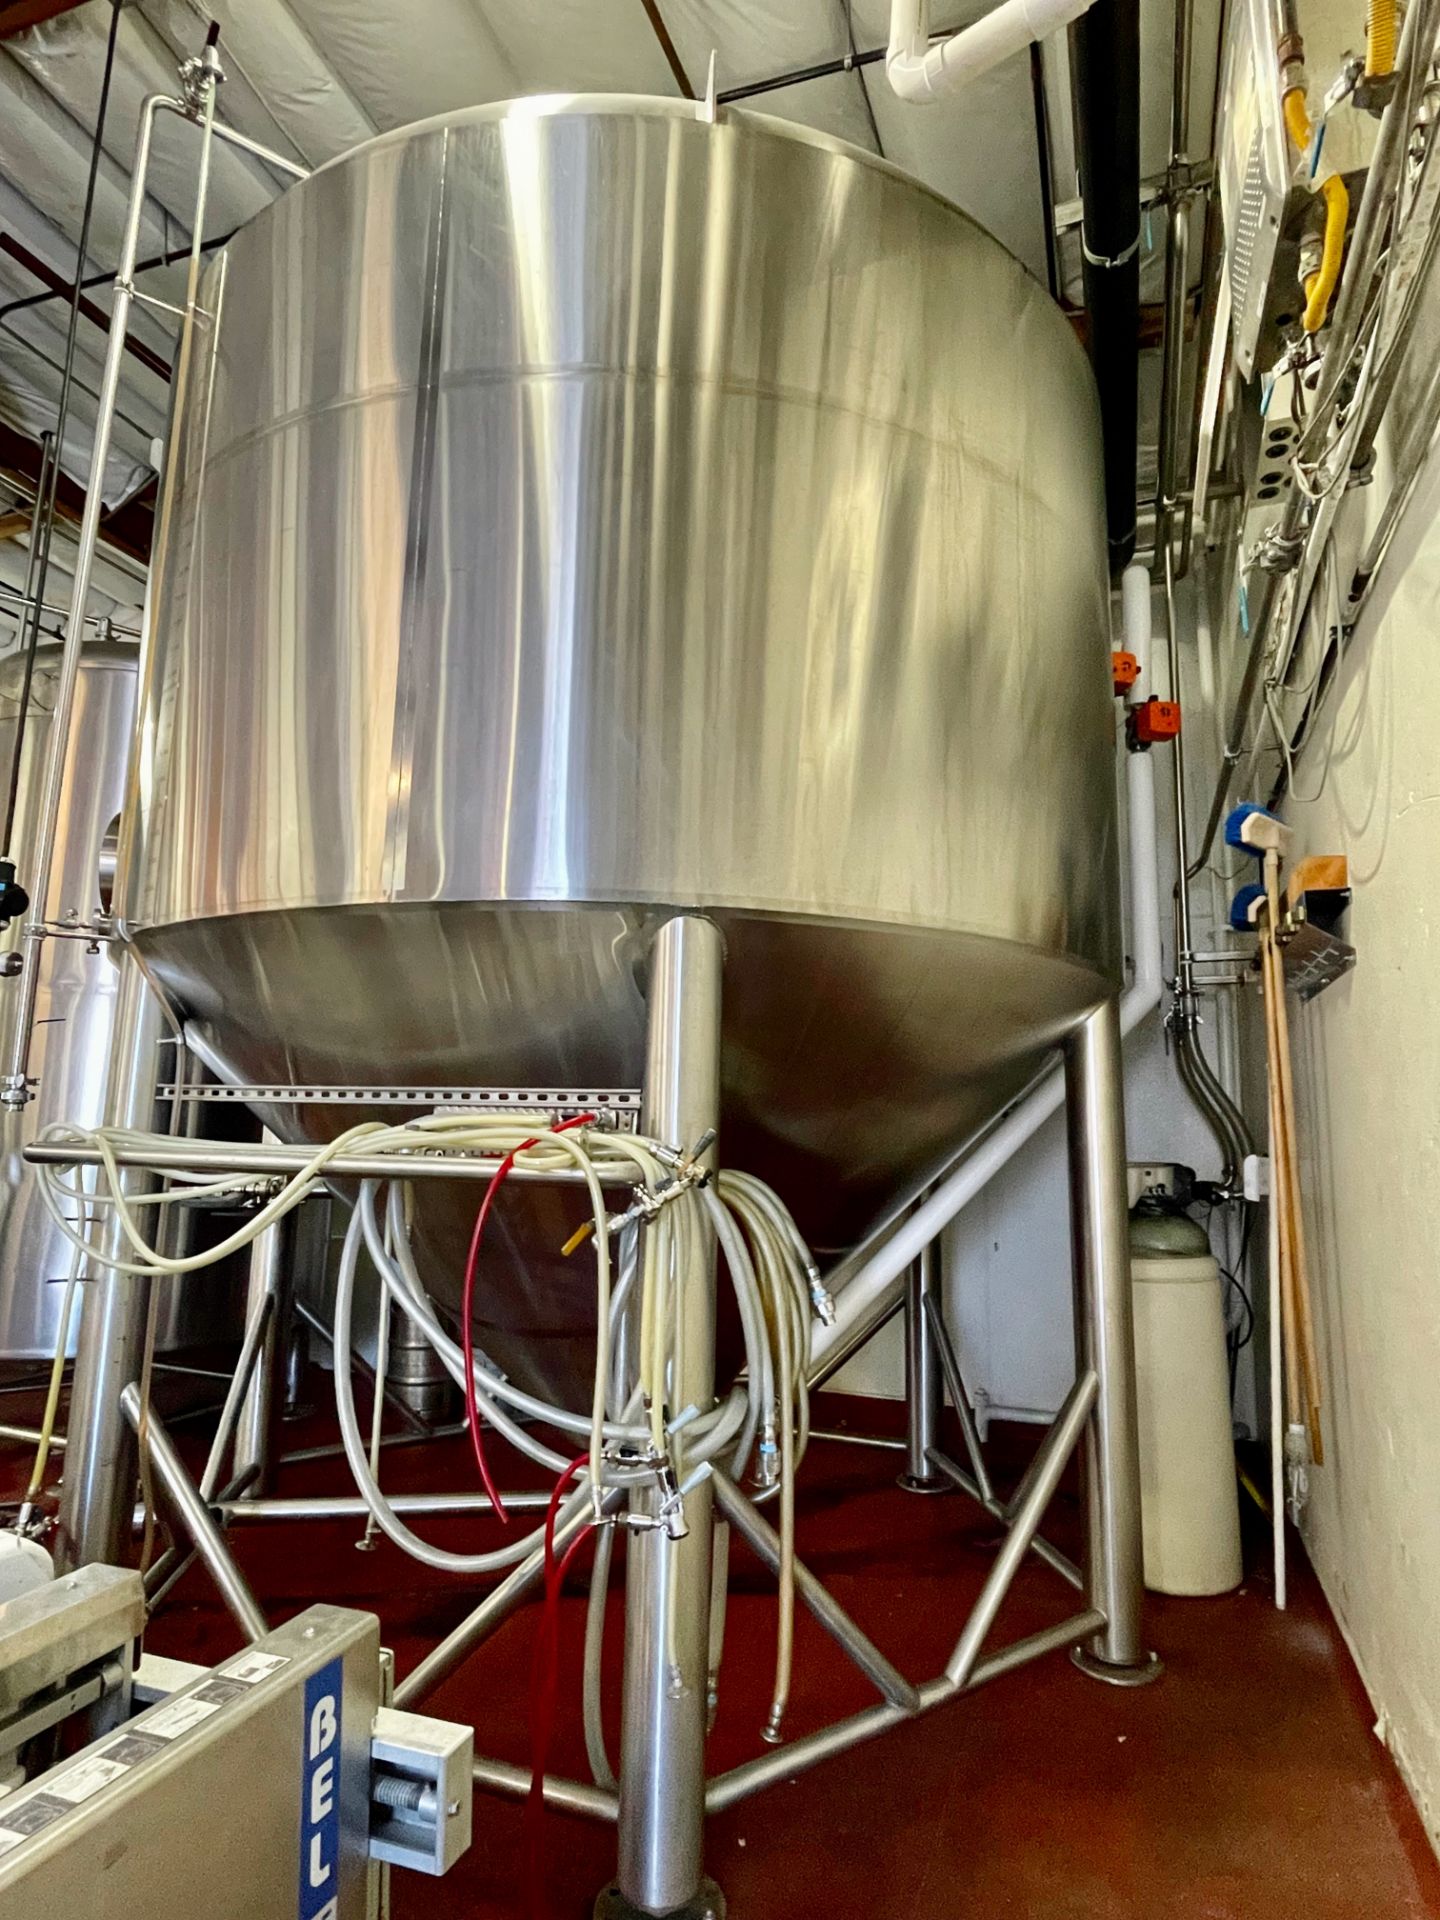 2016 Metalcraft 170 BBL Fermenter, Glycol Jacketed, Steep Cone Bottom, D | Rig Fee: $6350 w/ Saddles - Image 4 of 8